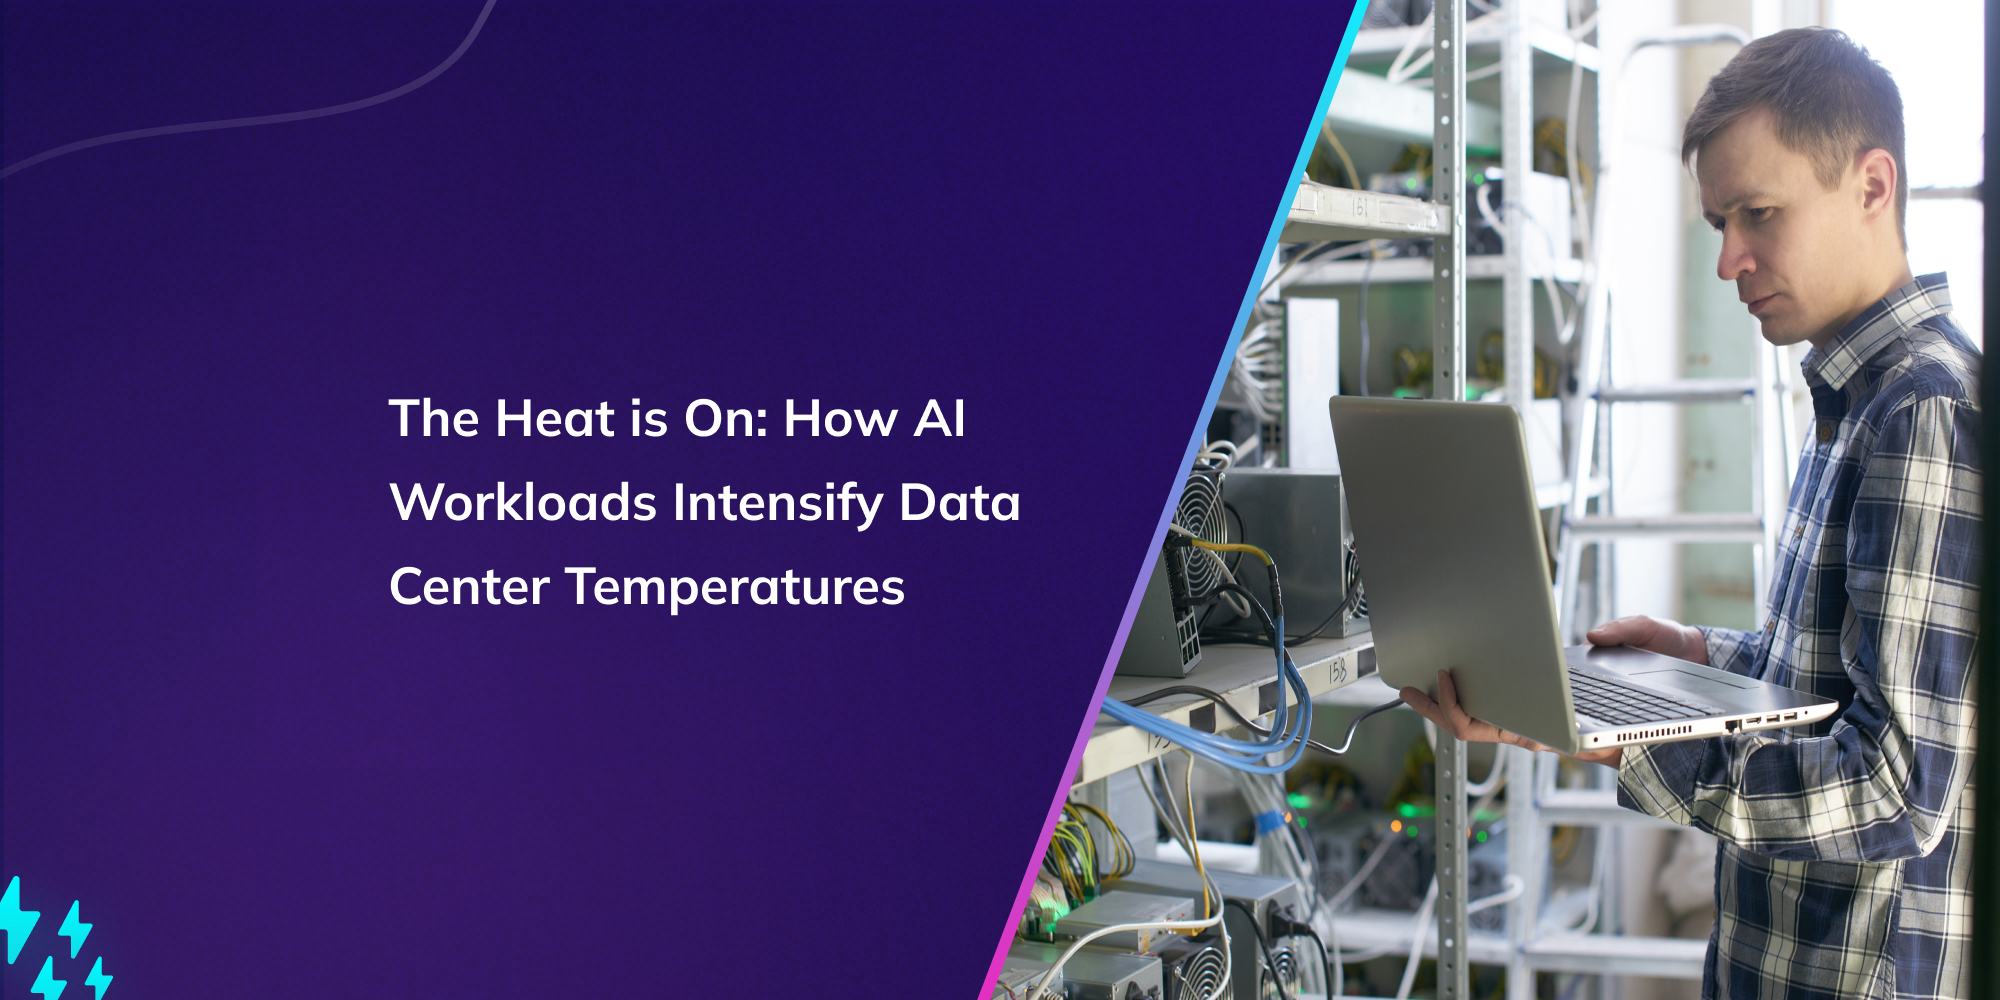 The Heat is On: How AI Workloads Intensify Data Center Temperatures